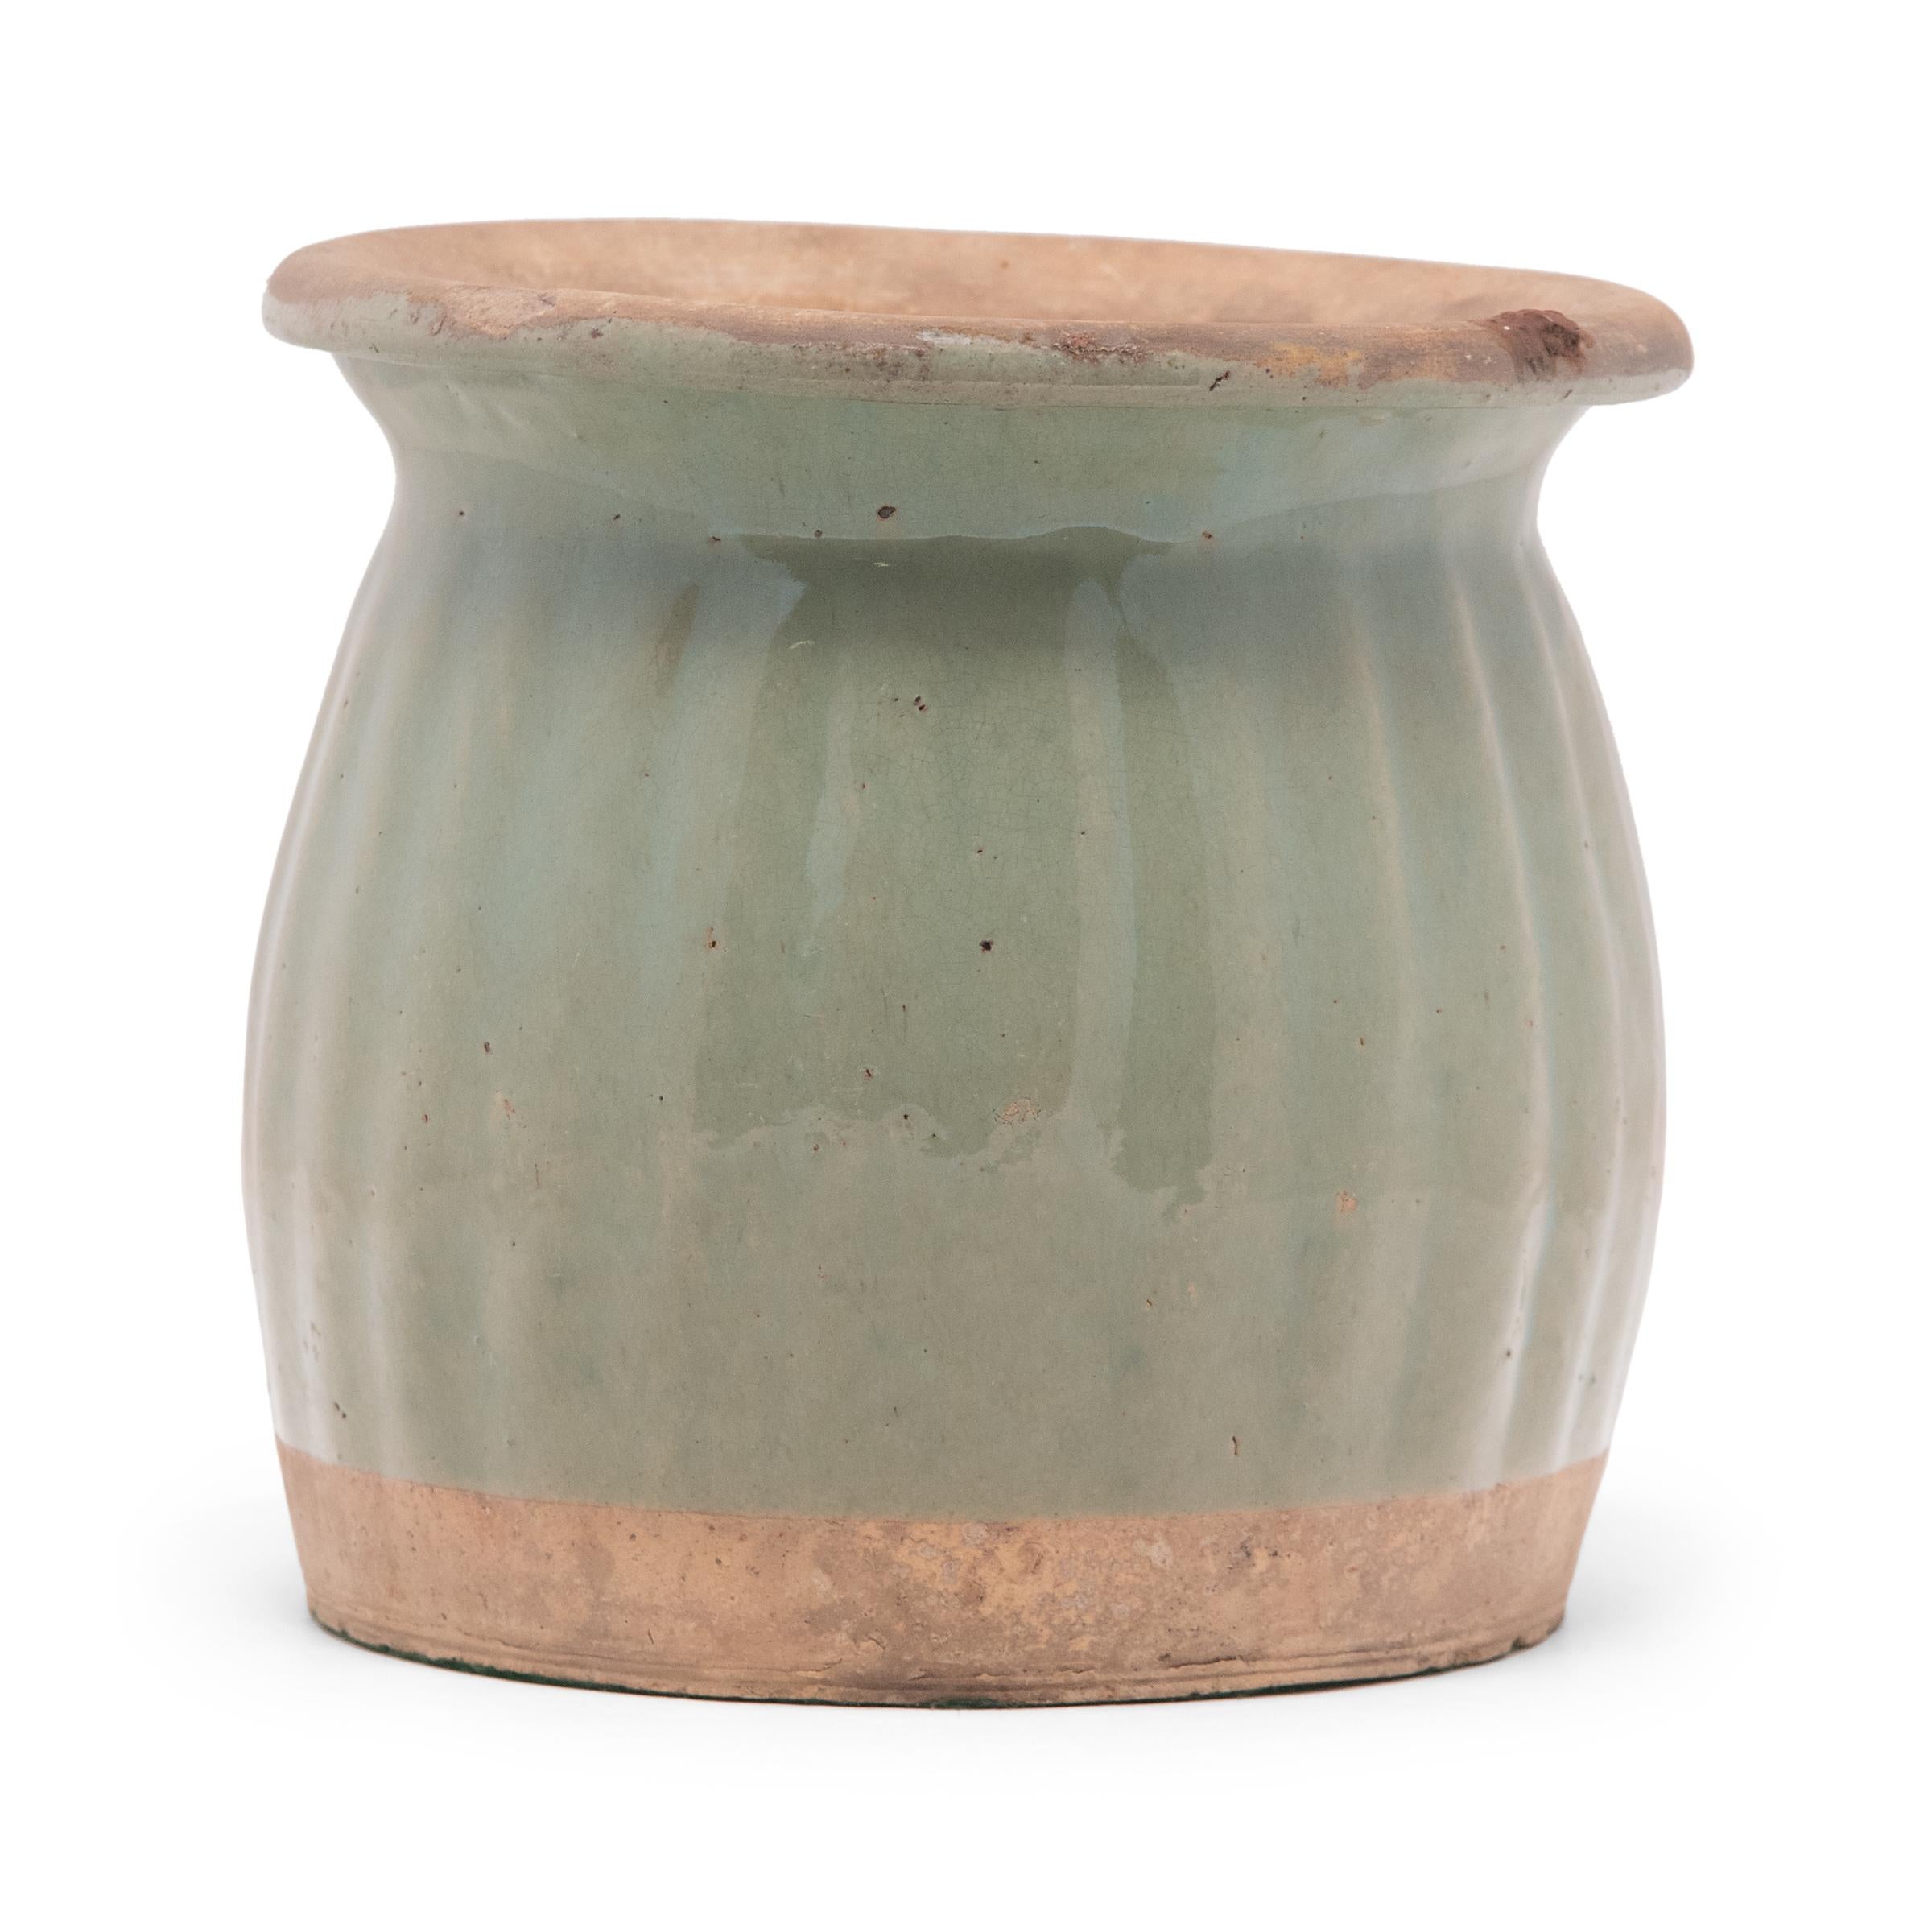 Dated to the early 20th century, this glazed ceramic jar features a flared lip and bulbous sides textured by a pattern of ridges. A celadon-green glaze coats the swelling sides, gently aged with minor crazing and pitted wear. The top opening is wide